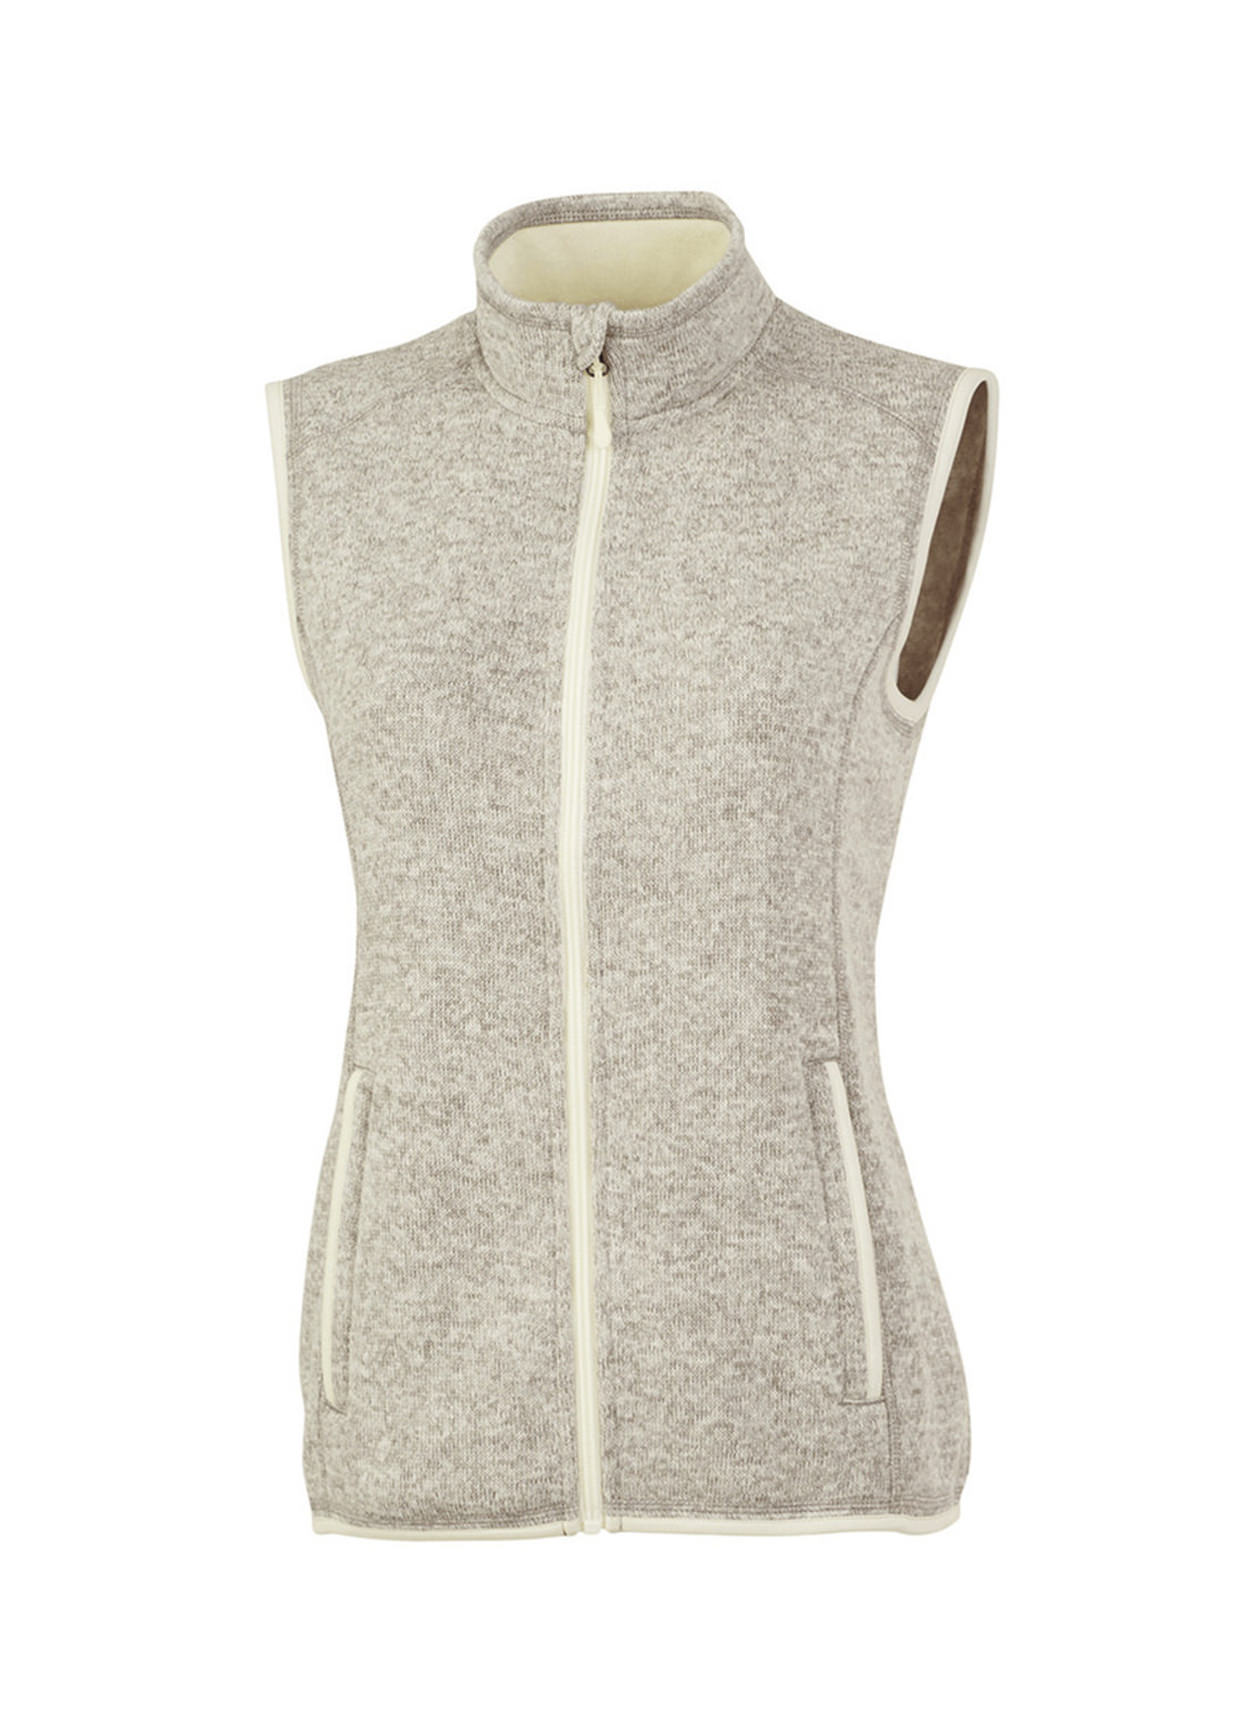 Charles River Women's Oatmeal Heather Pacific Heathered Vest